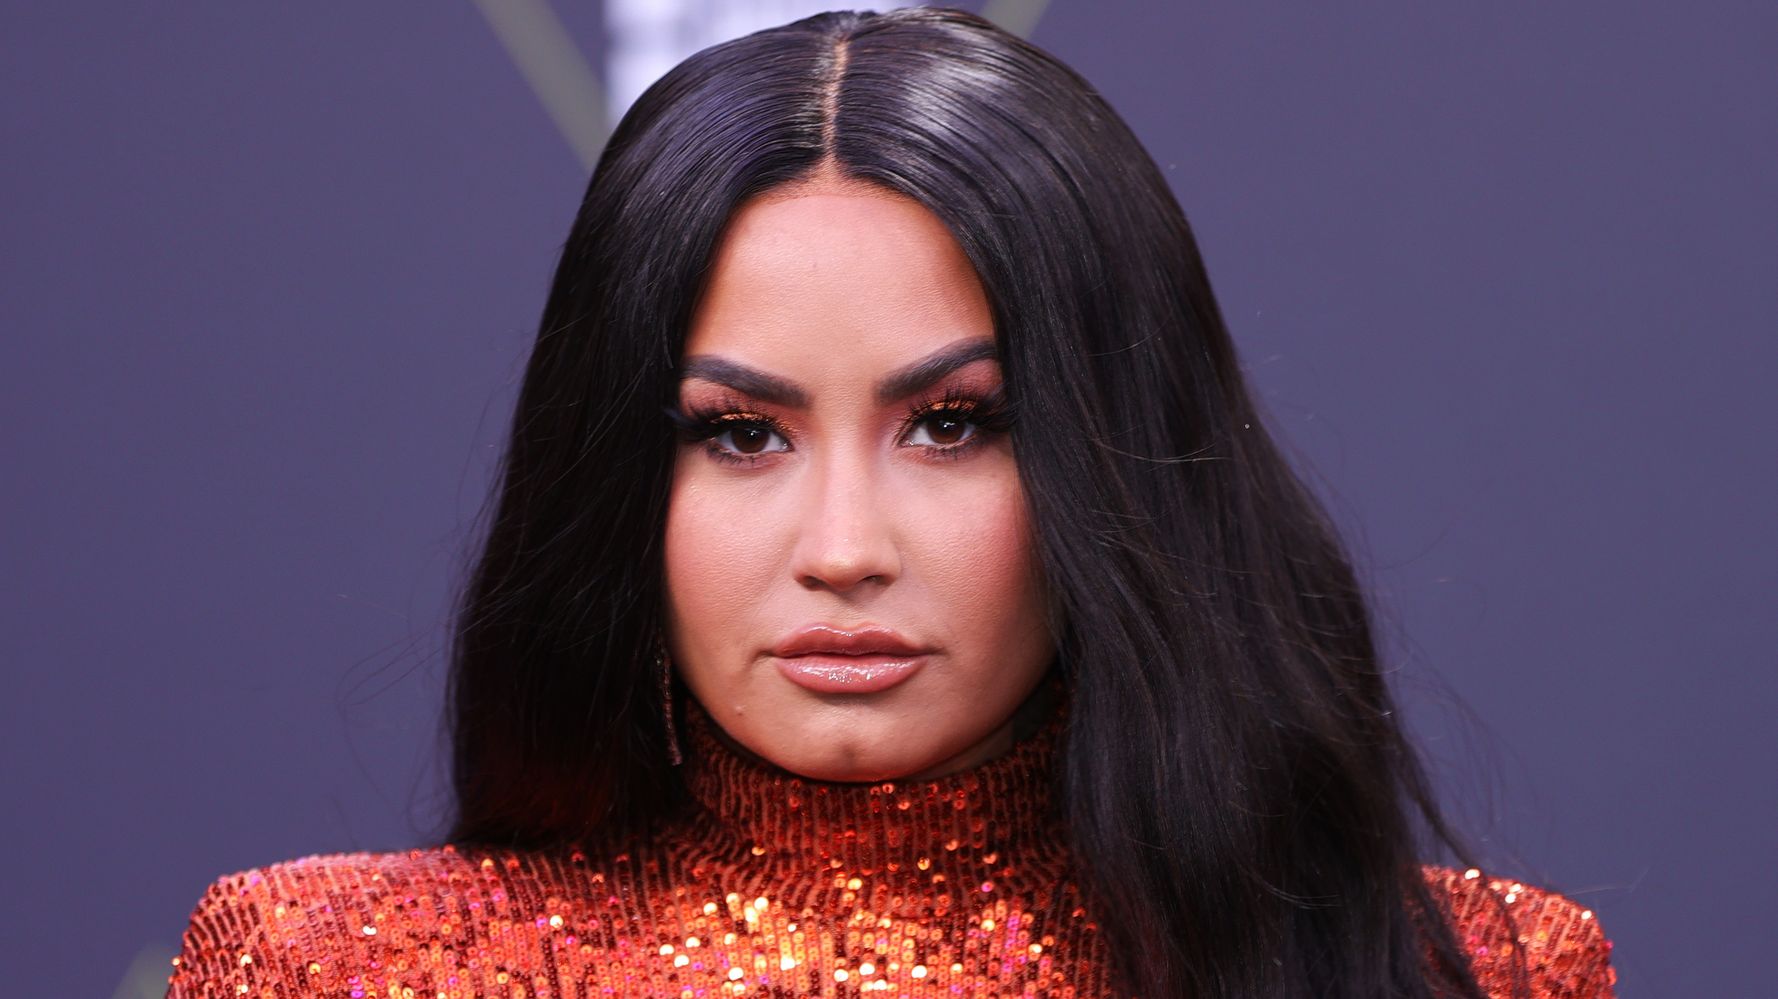 Demi Lovato says she suffered heart attacks, strokes and injuries caused by overdose